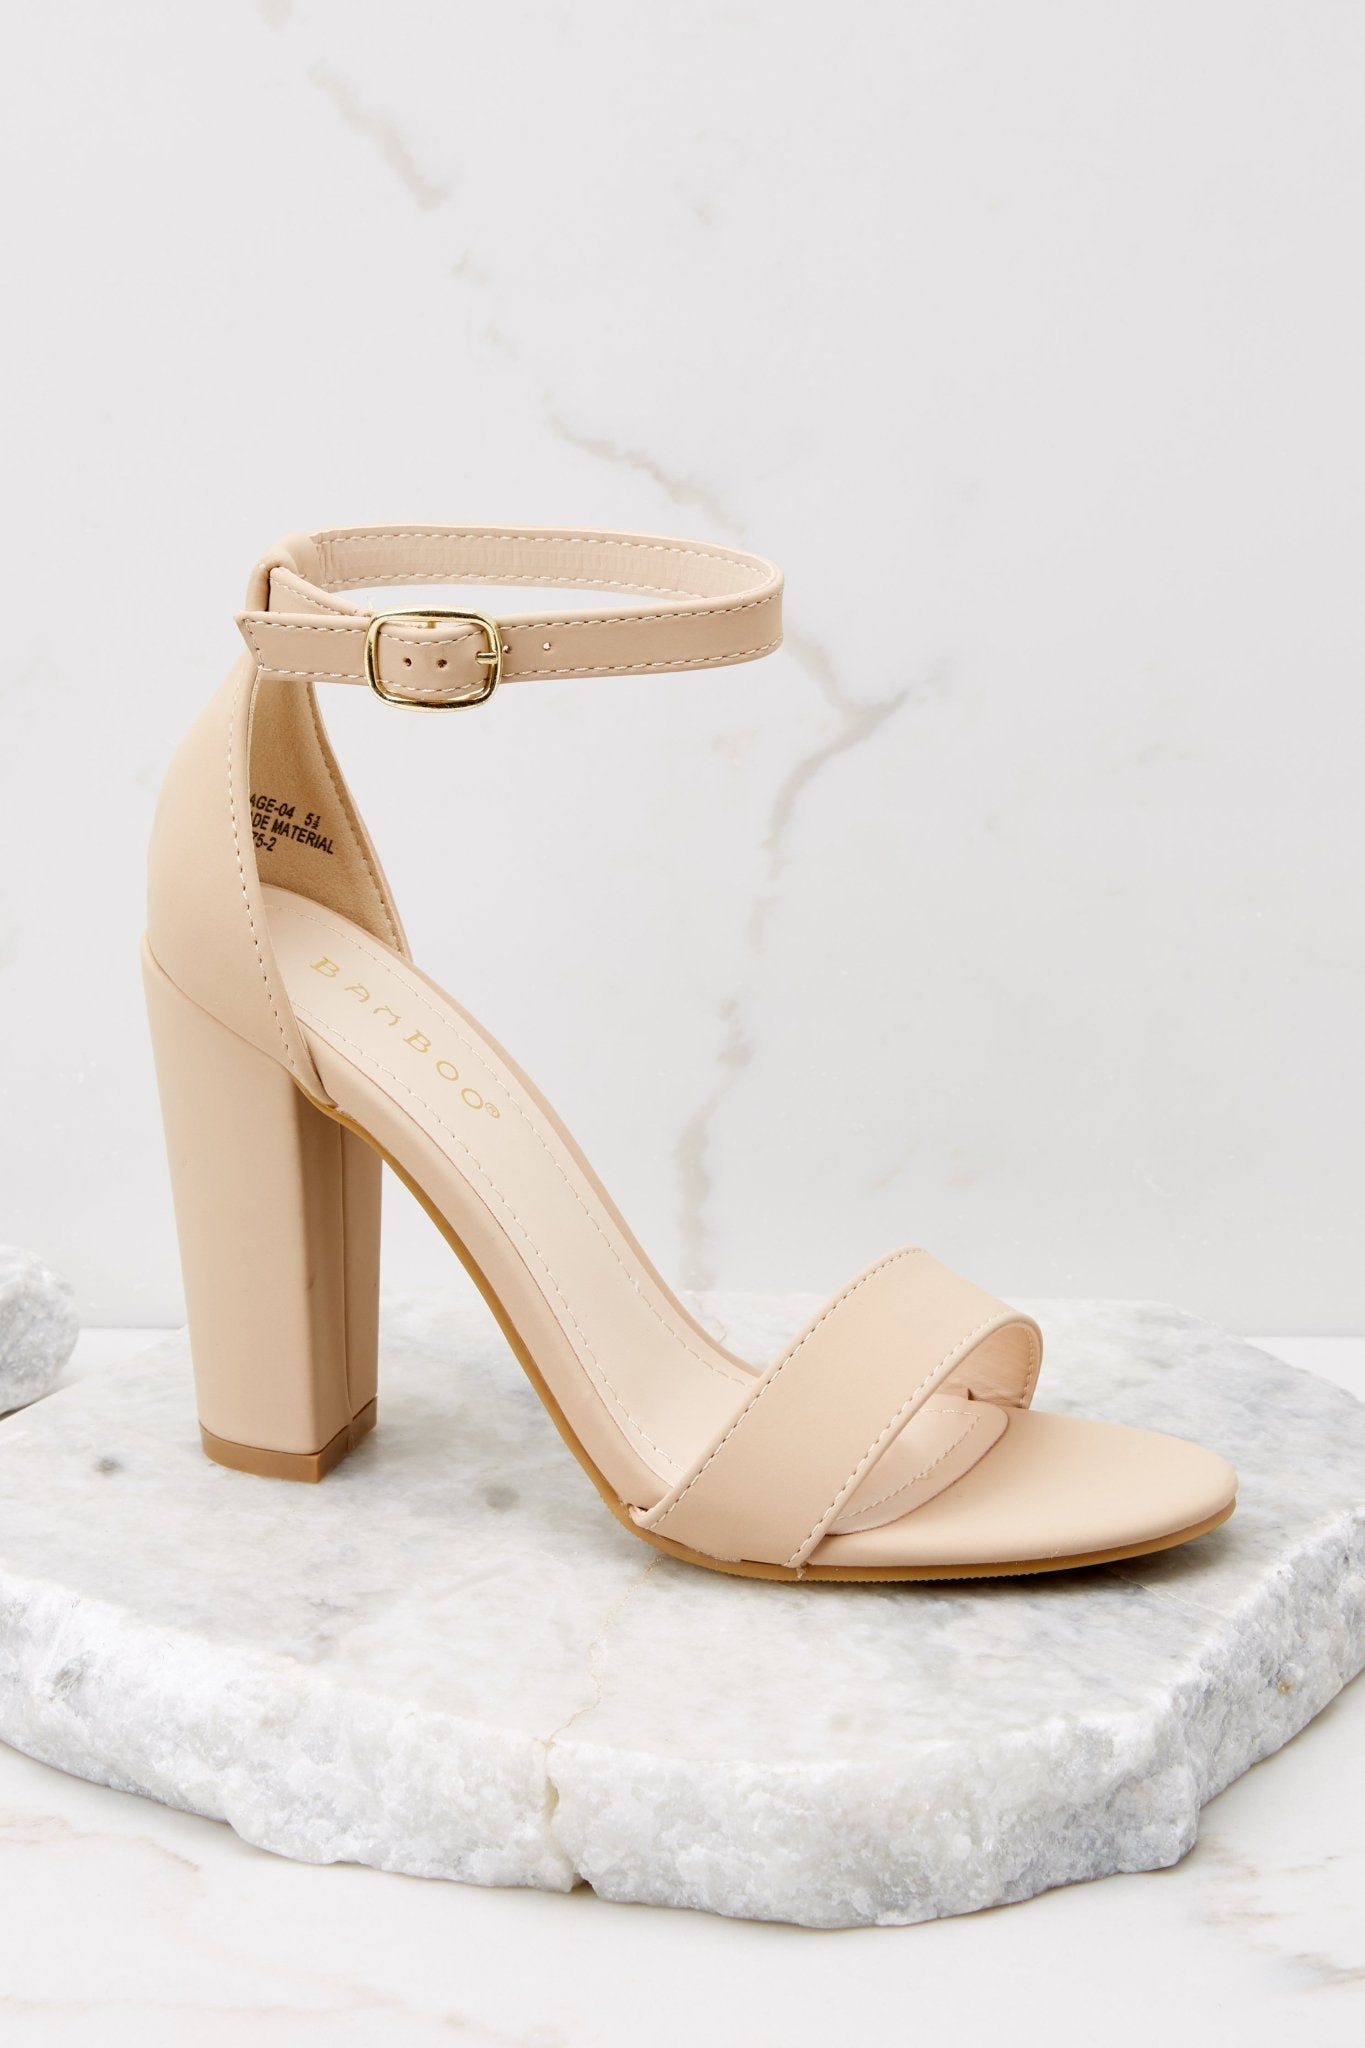 Chanel Beige and Black Ankle-Strap Pump Heels Size EU 37 RRP £950 – Sellier